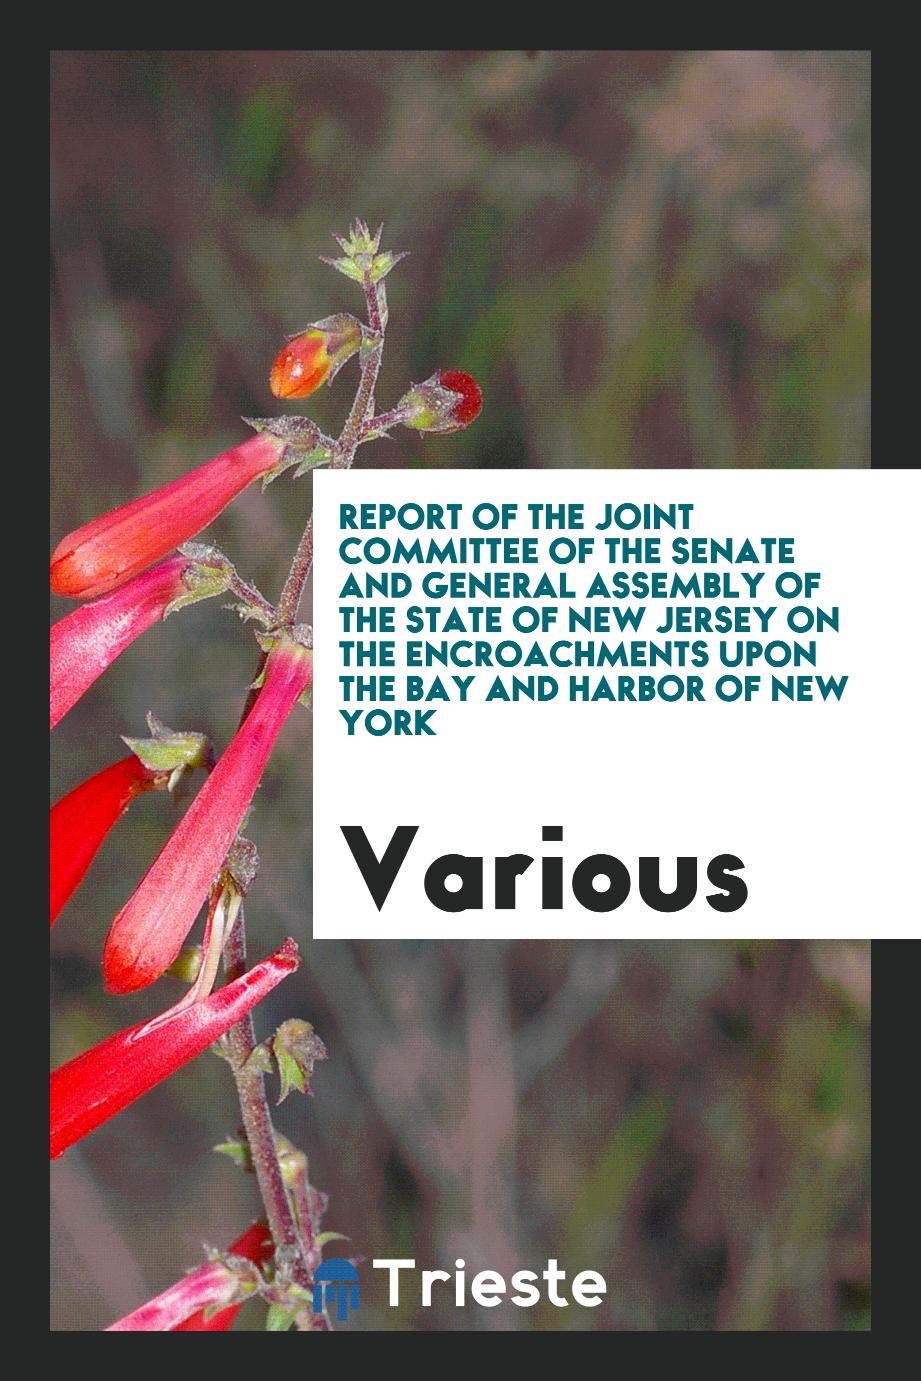 Report of the Joint Committee of the Senate and General Assembly of the state of new jersey on the encroachments upon the bay and harbor of new york